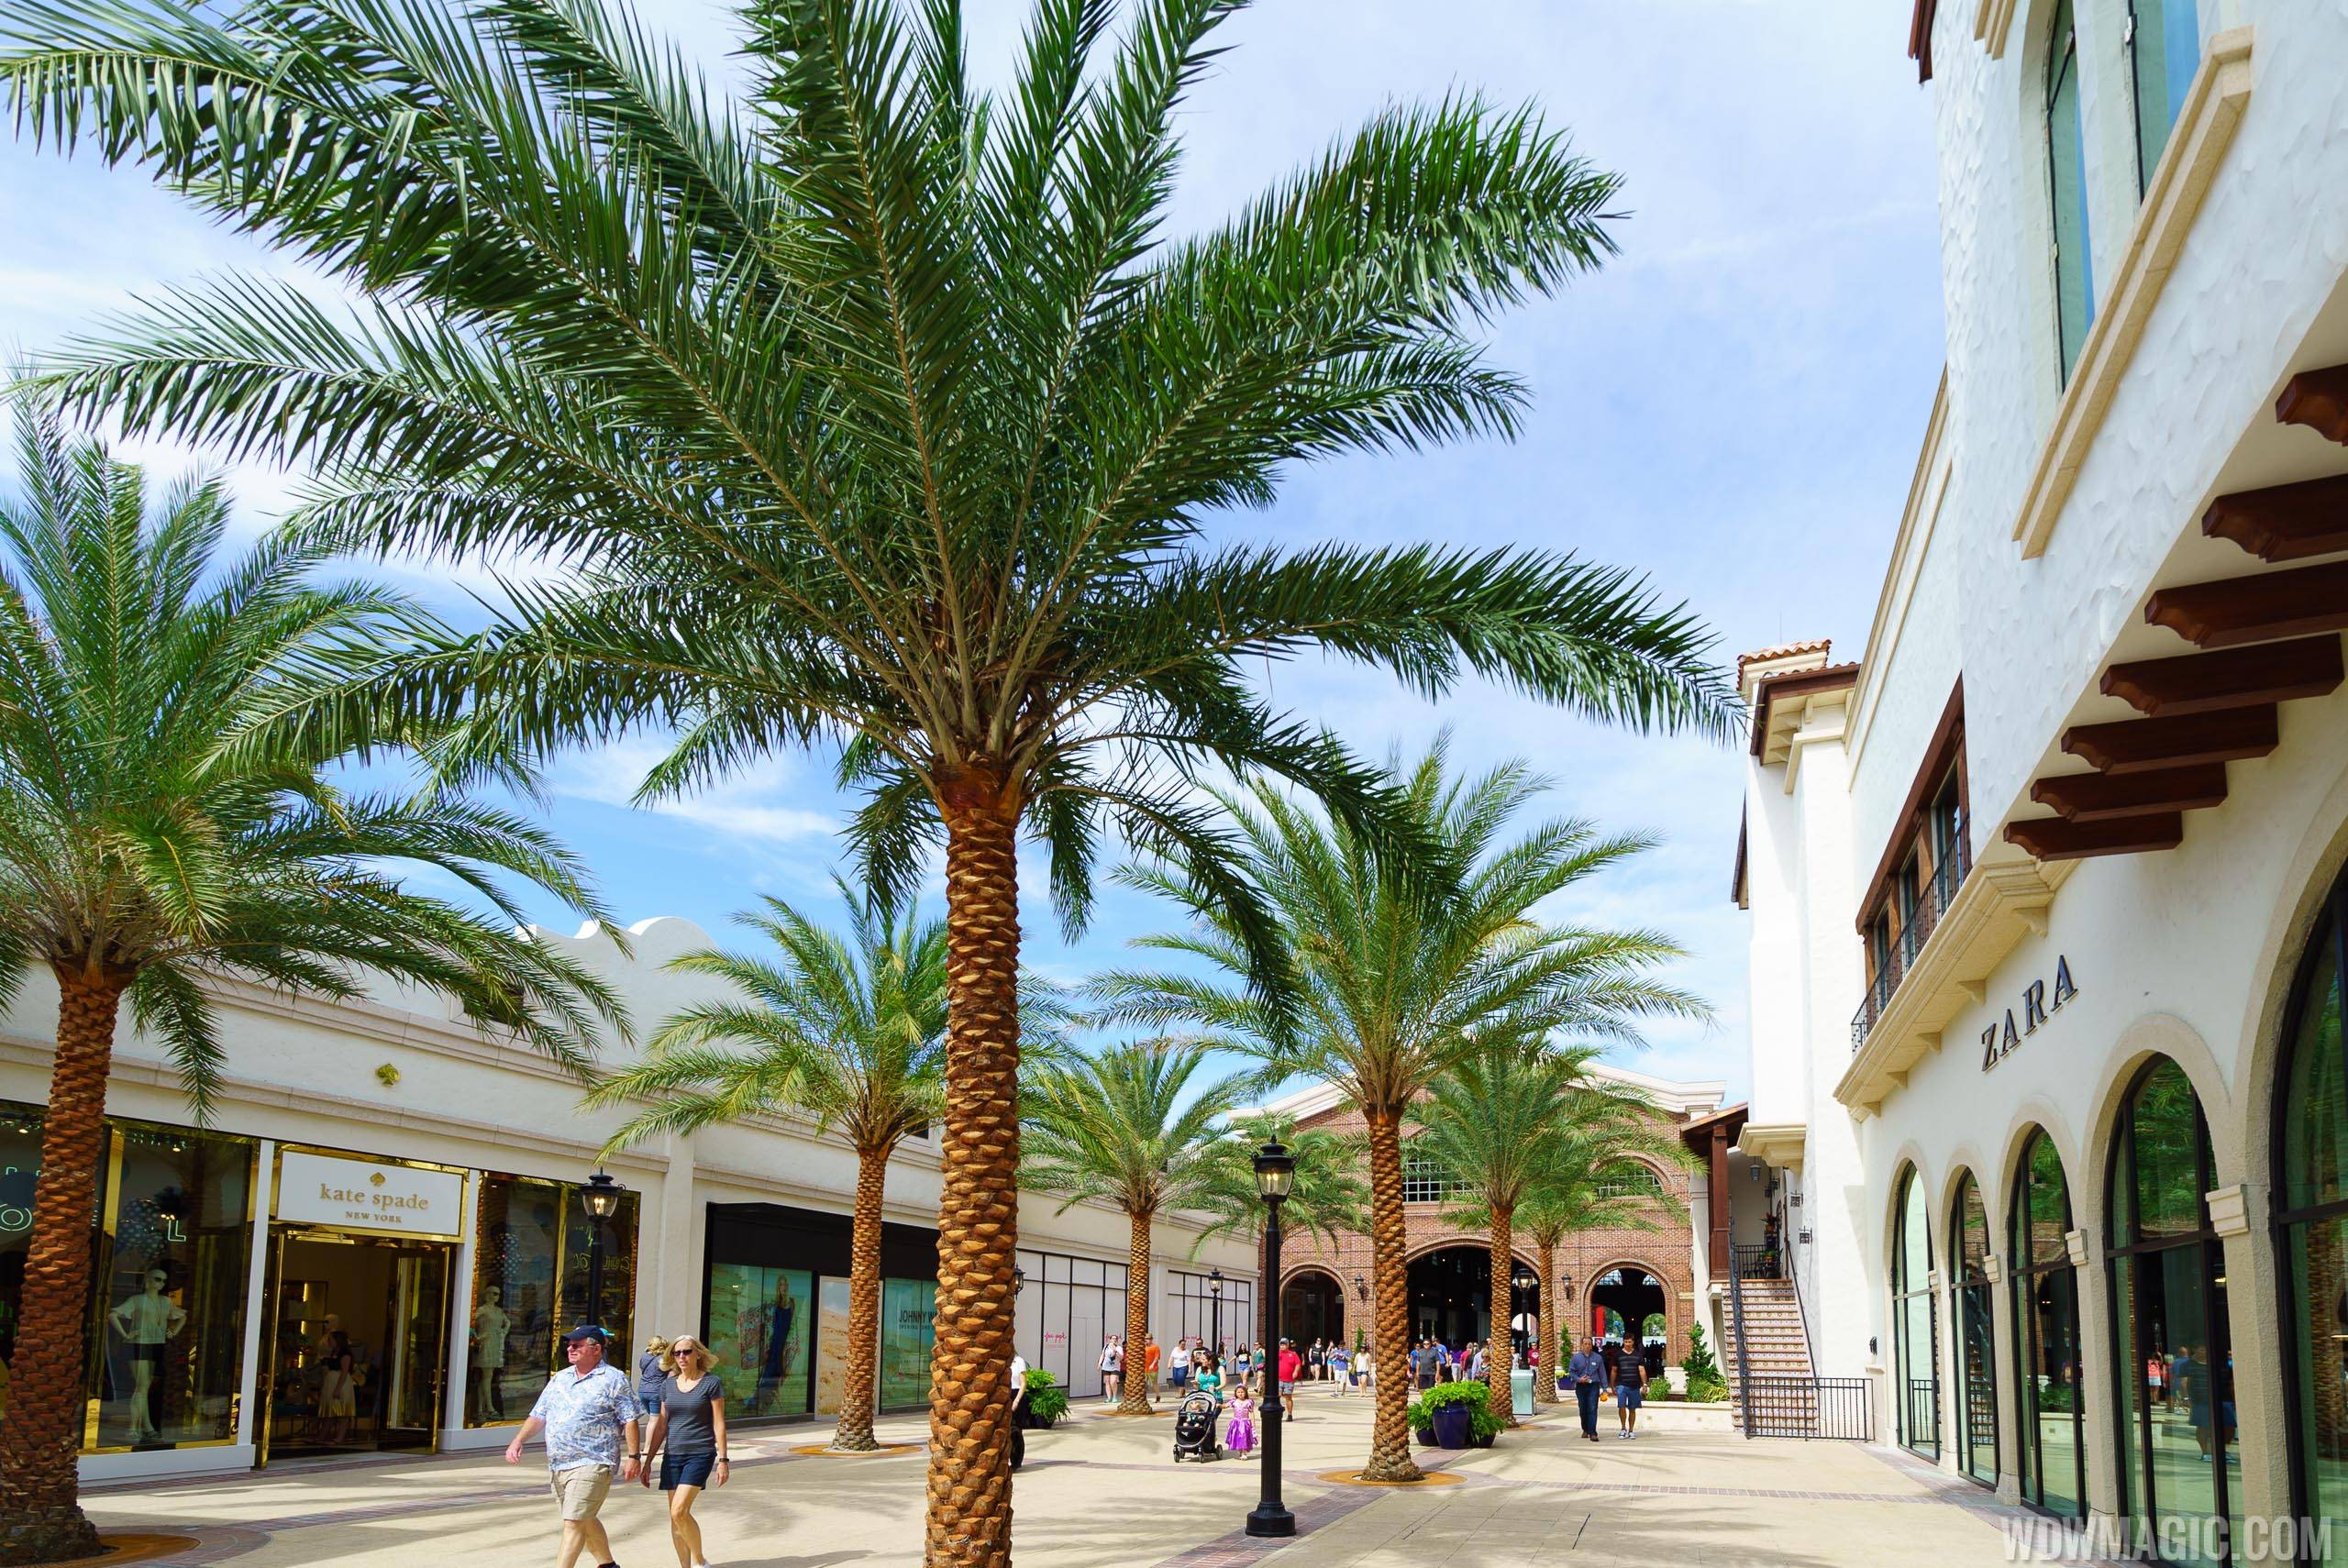 VIDEO - Take a complete walk-through of the Town Center at Disney Springs